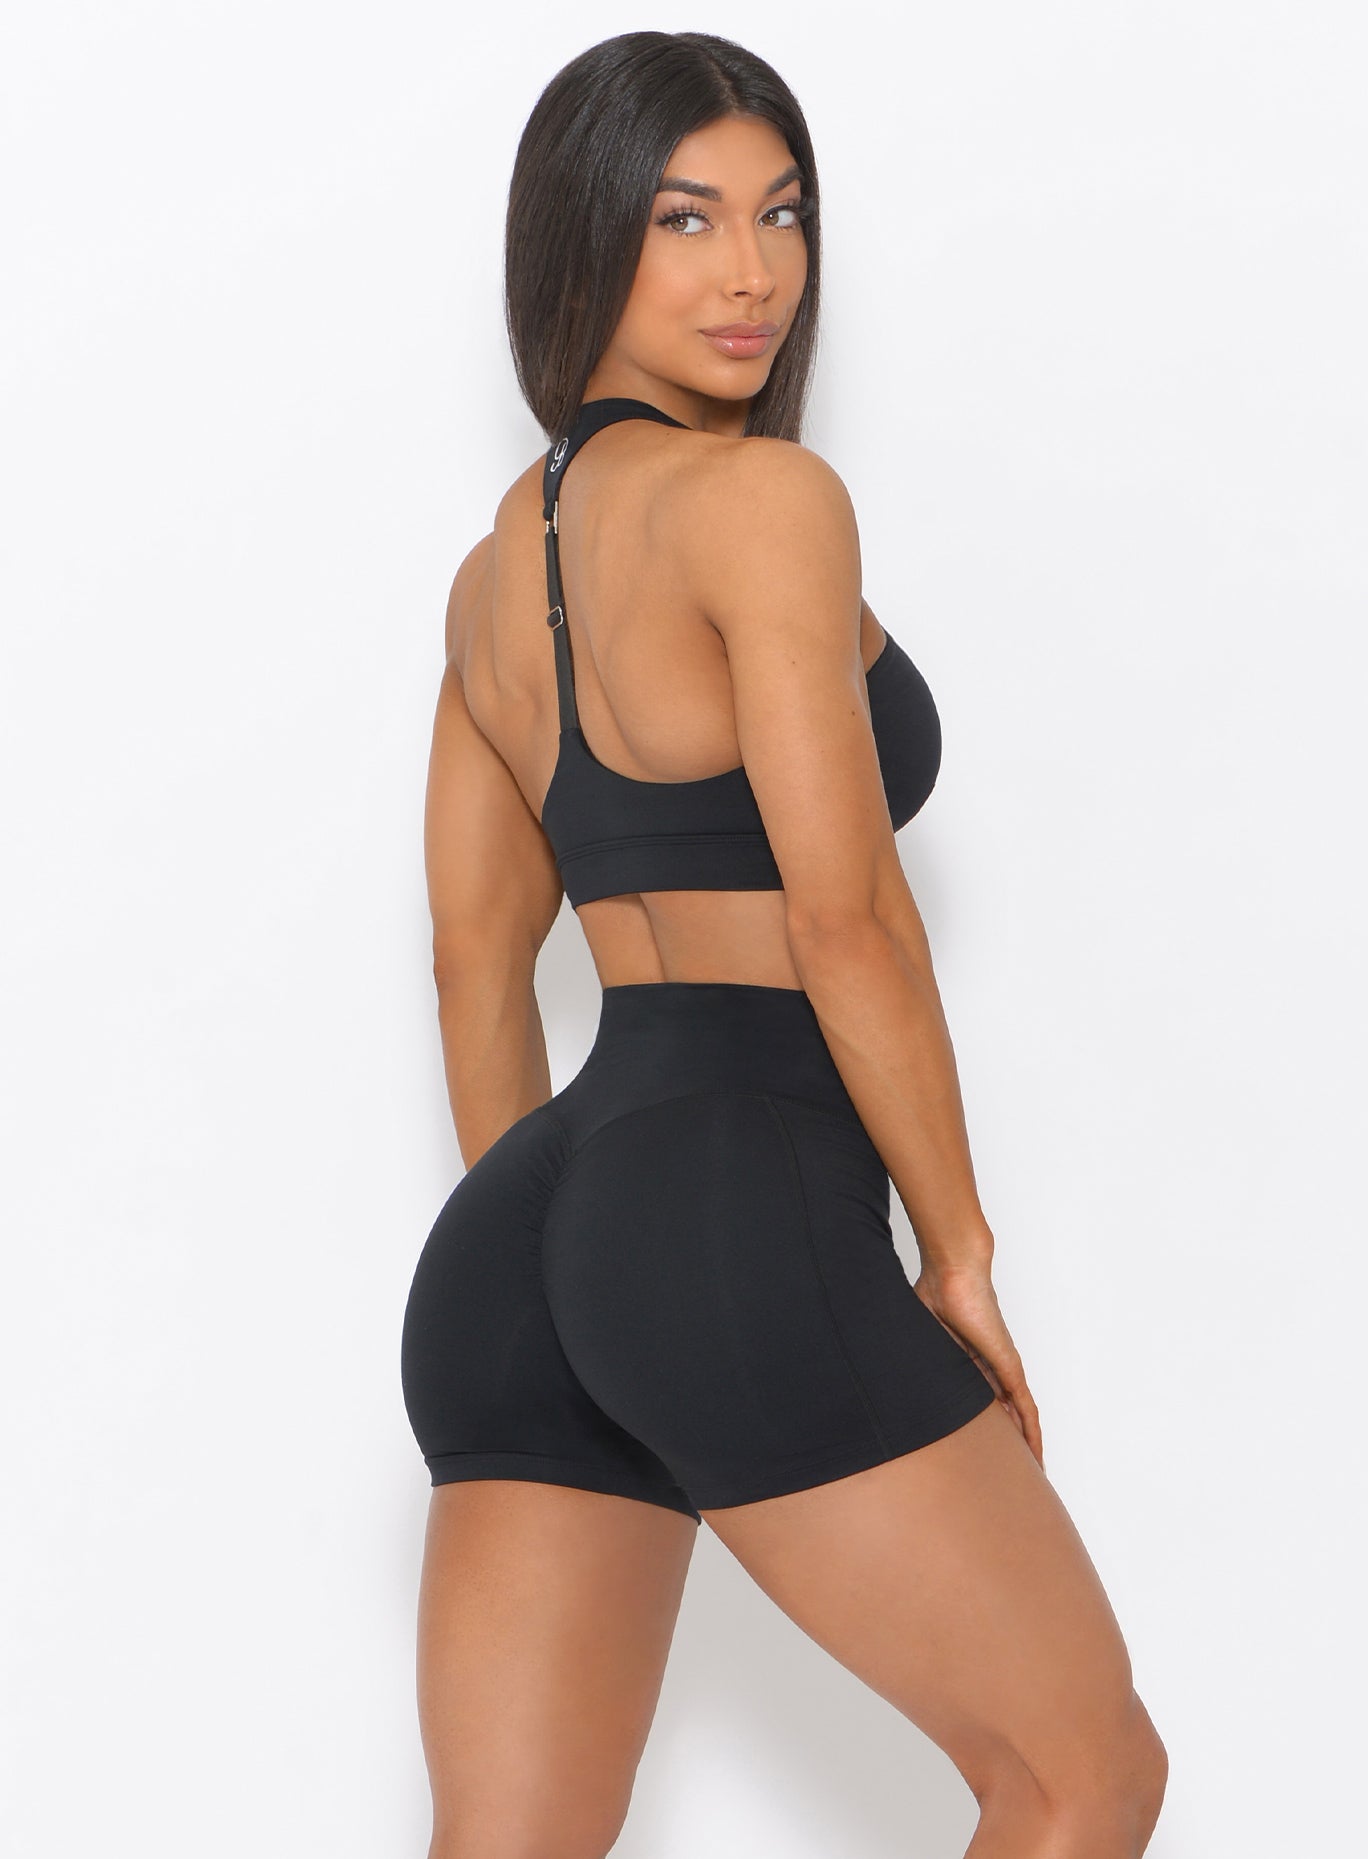 Right side view of the model in our black weightlifter bra and a matching shorts